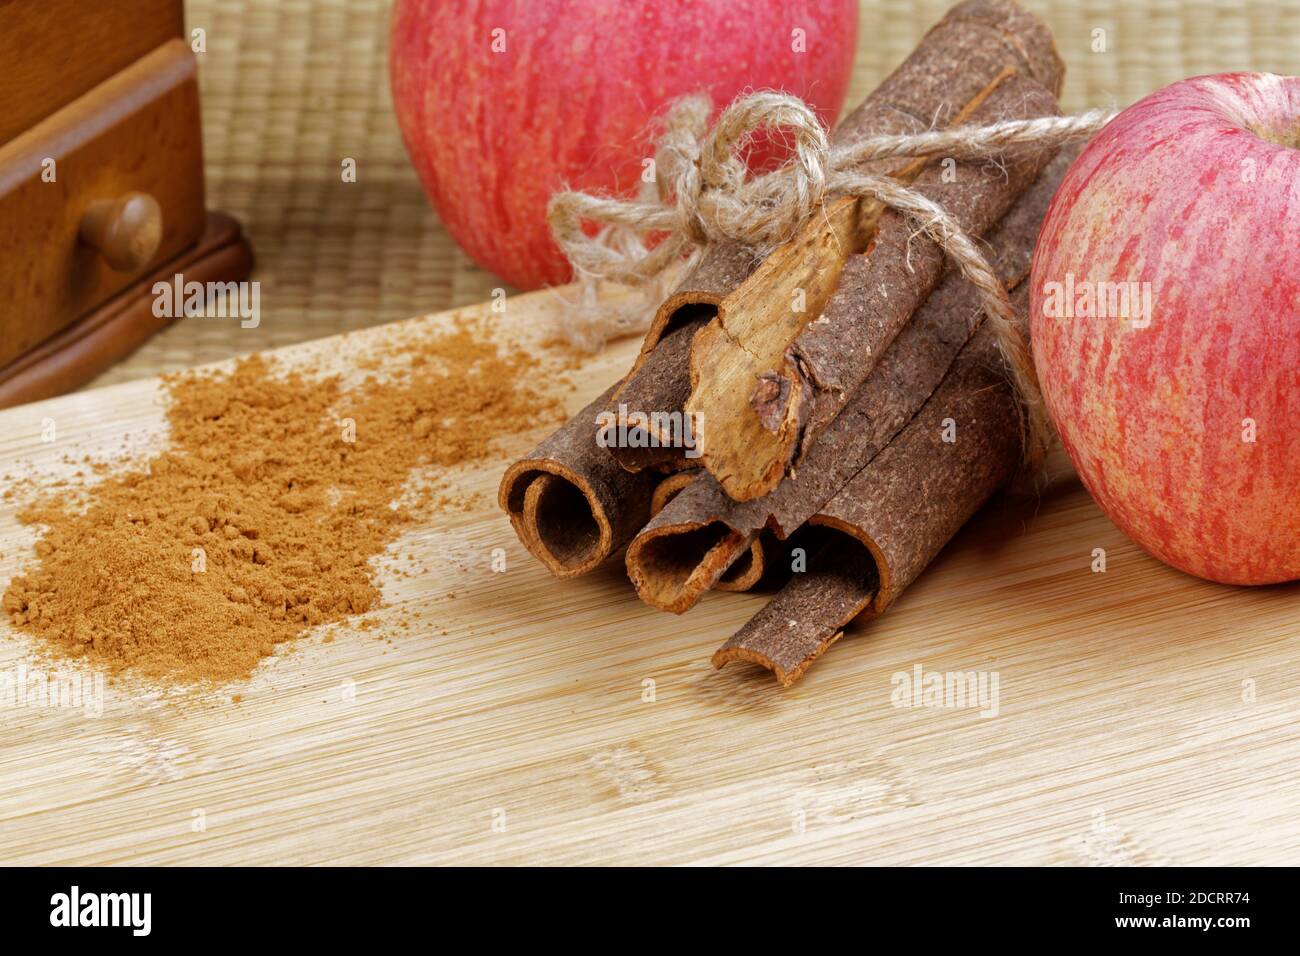 Delicious cinnamon power, cinnamon bark and red apples on a wooden background Stock Photo